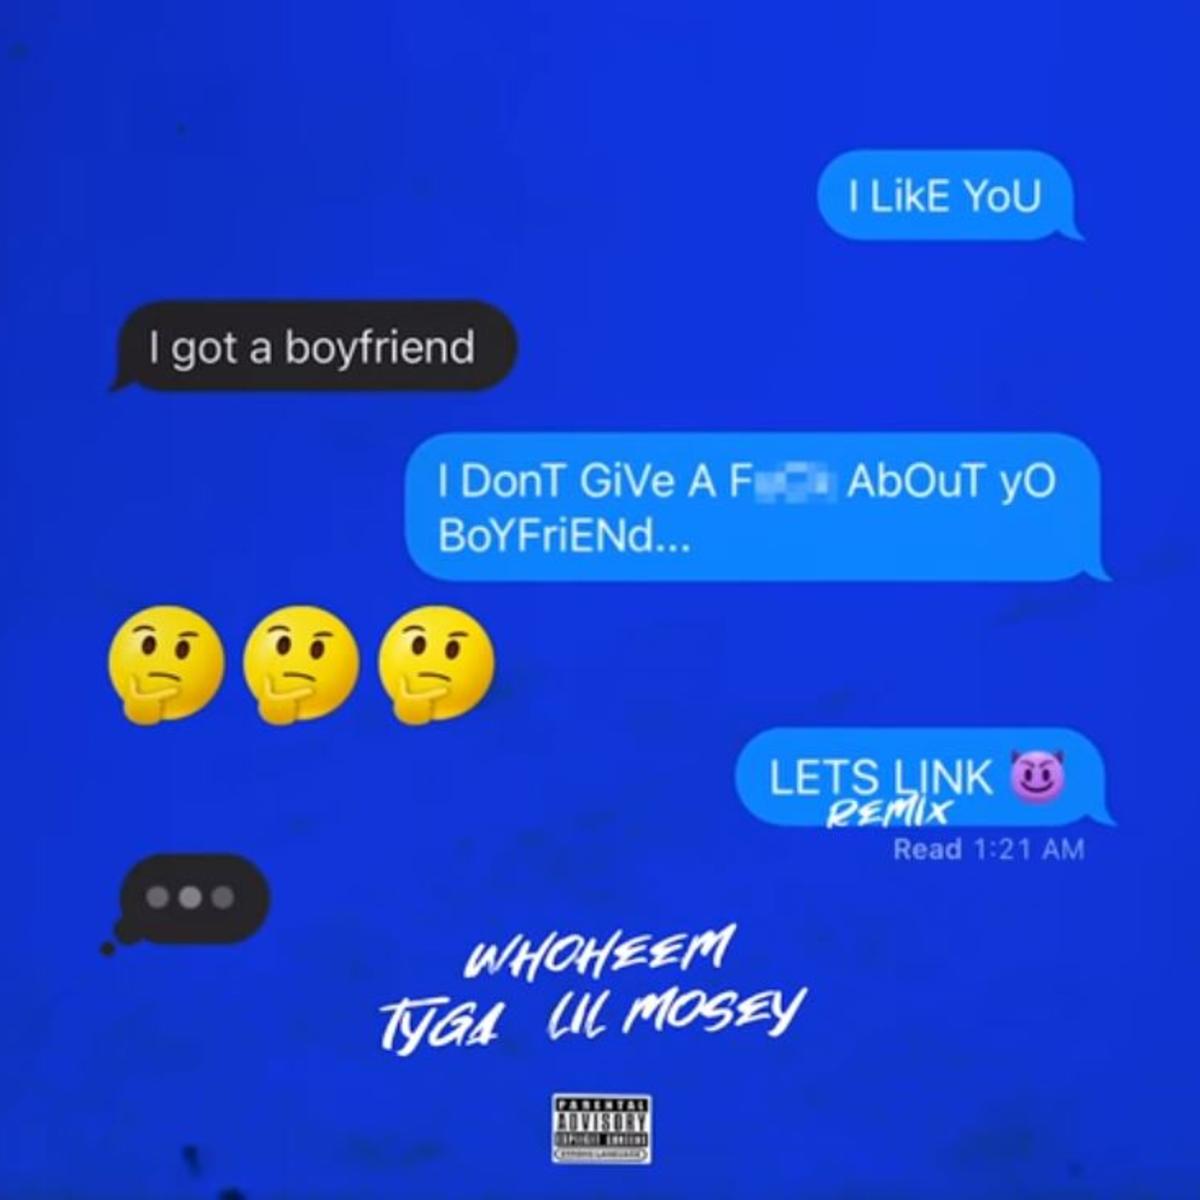 Whoheem Calls On Tyga & Lil Mosey For A Remix To “Let’s Link”